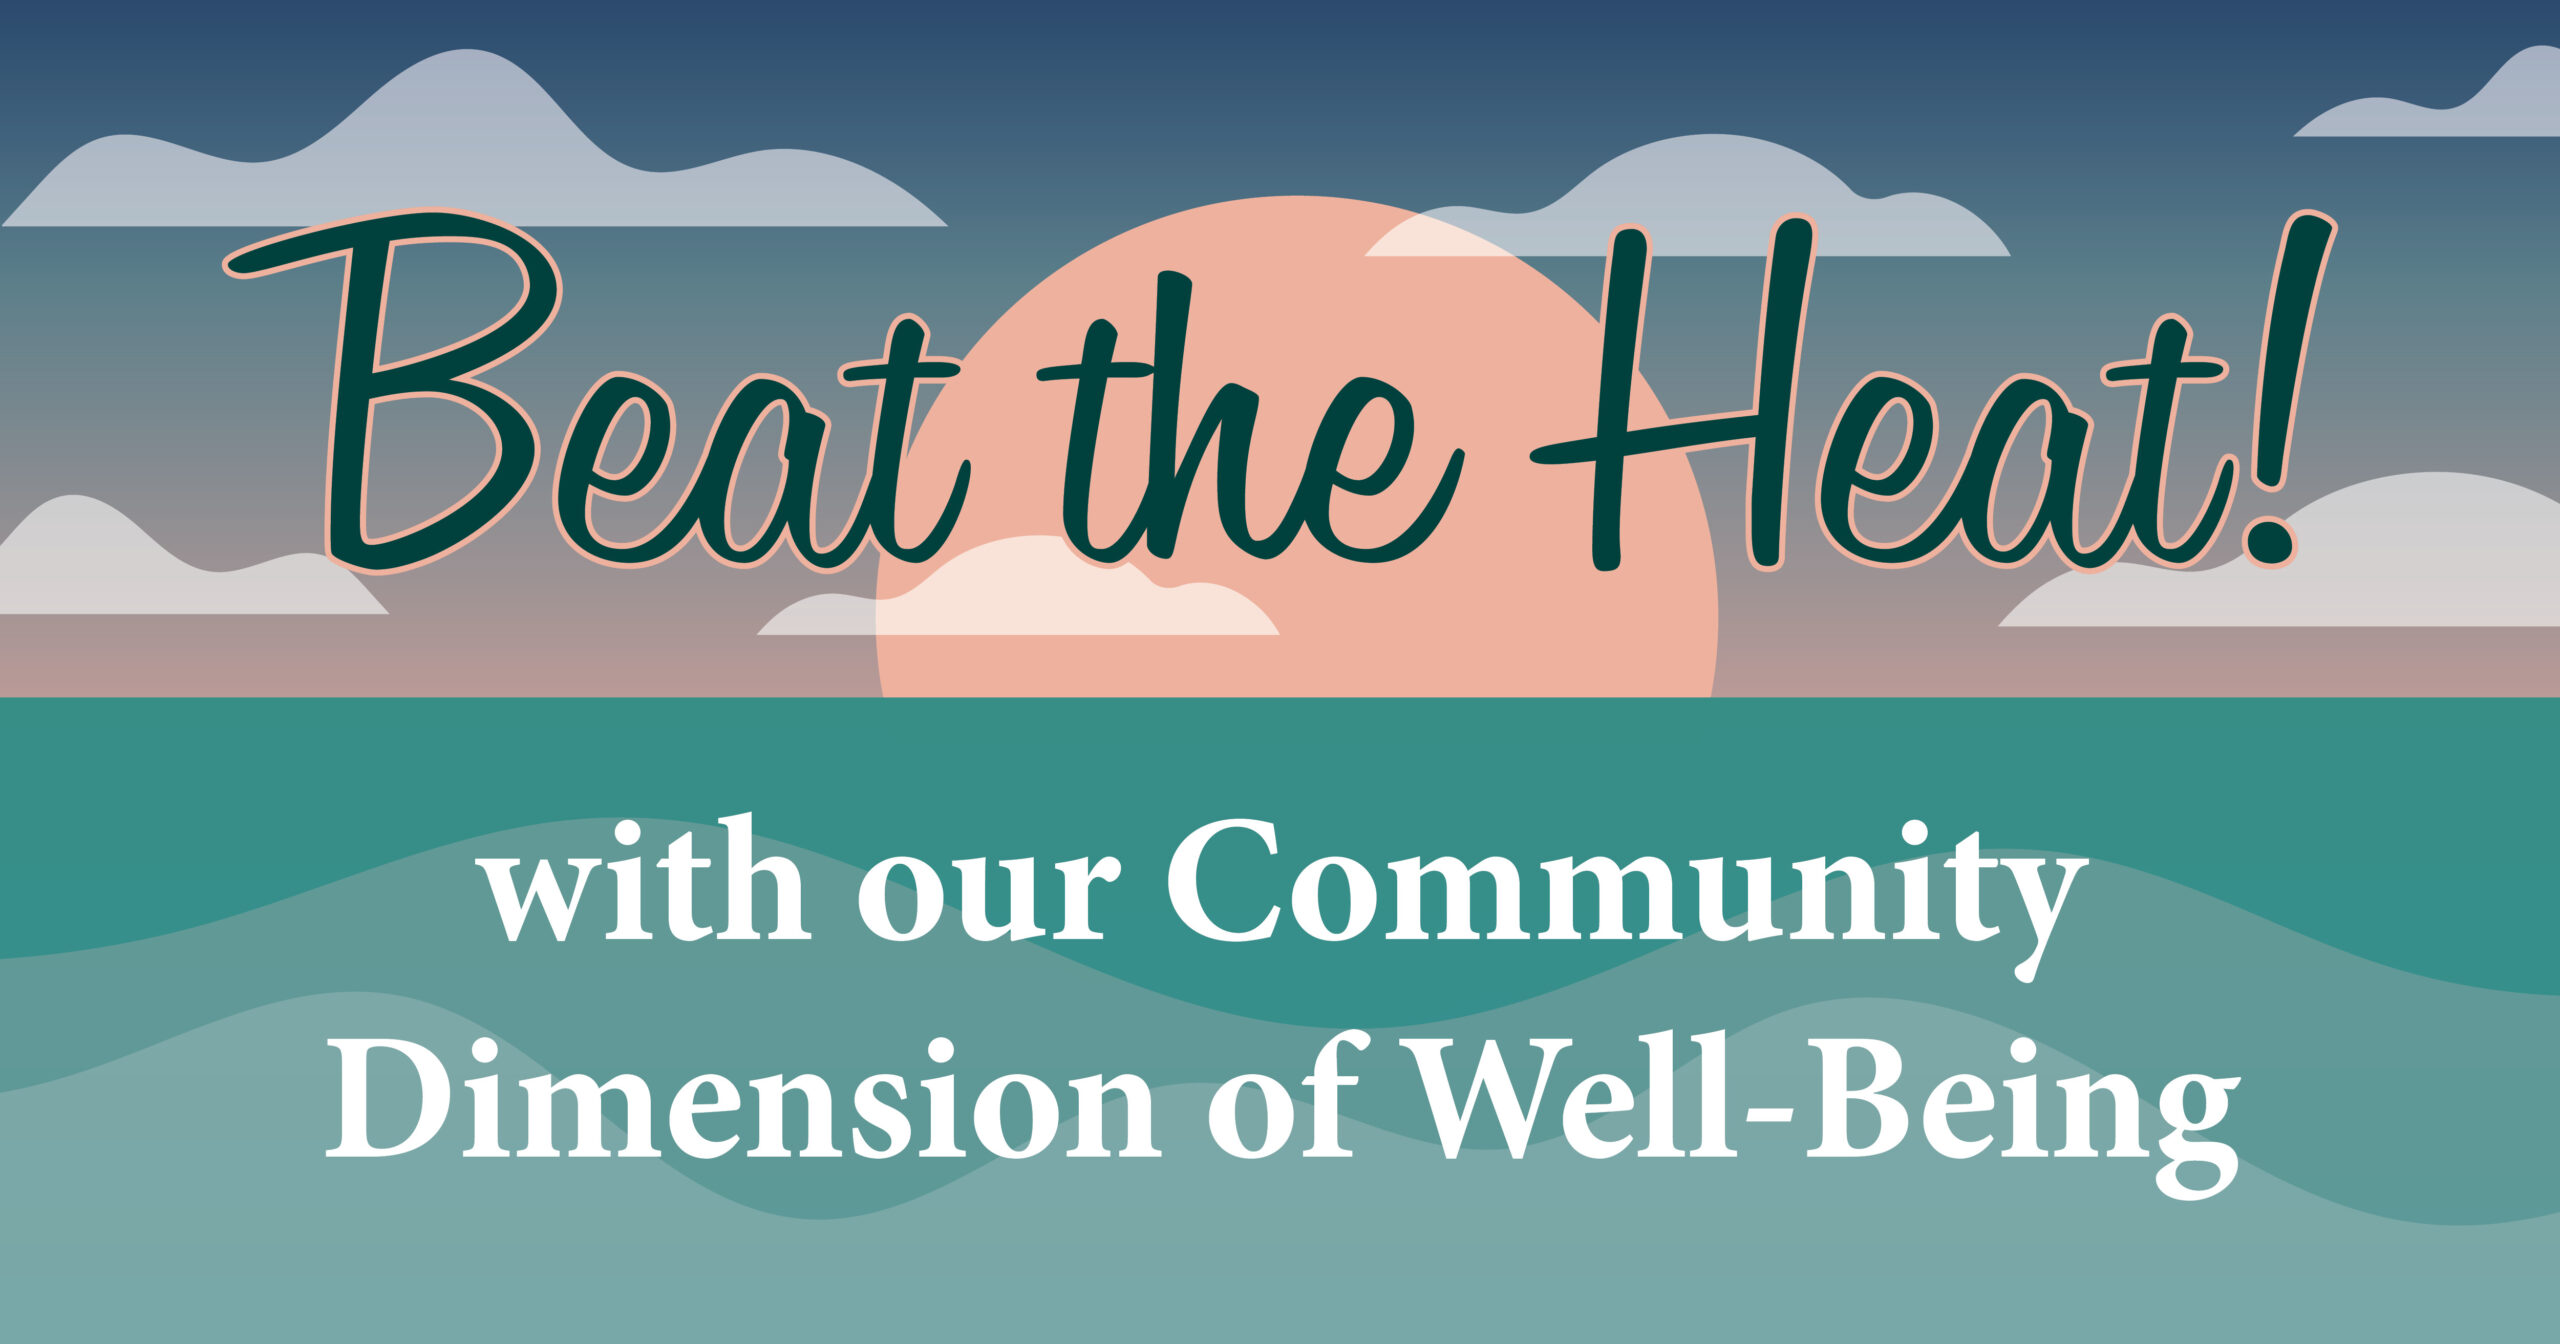 Beat the Heat with our Community Dimension of Well-Being